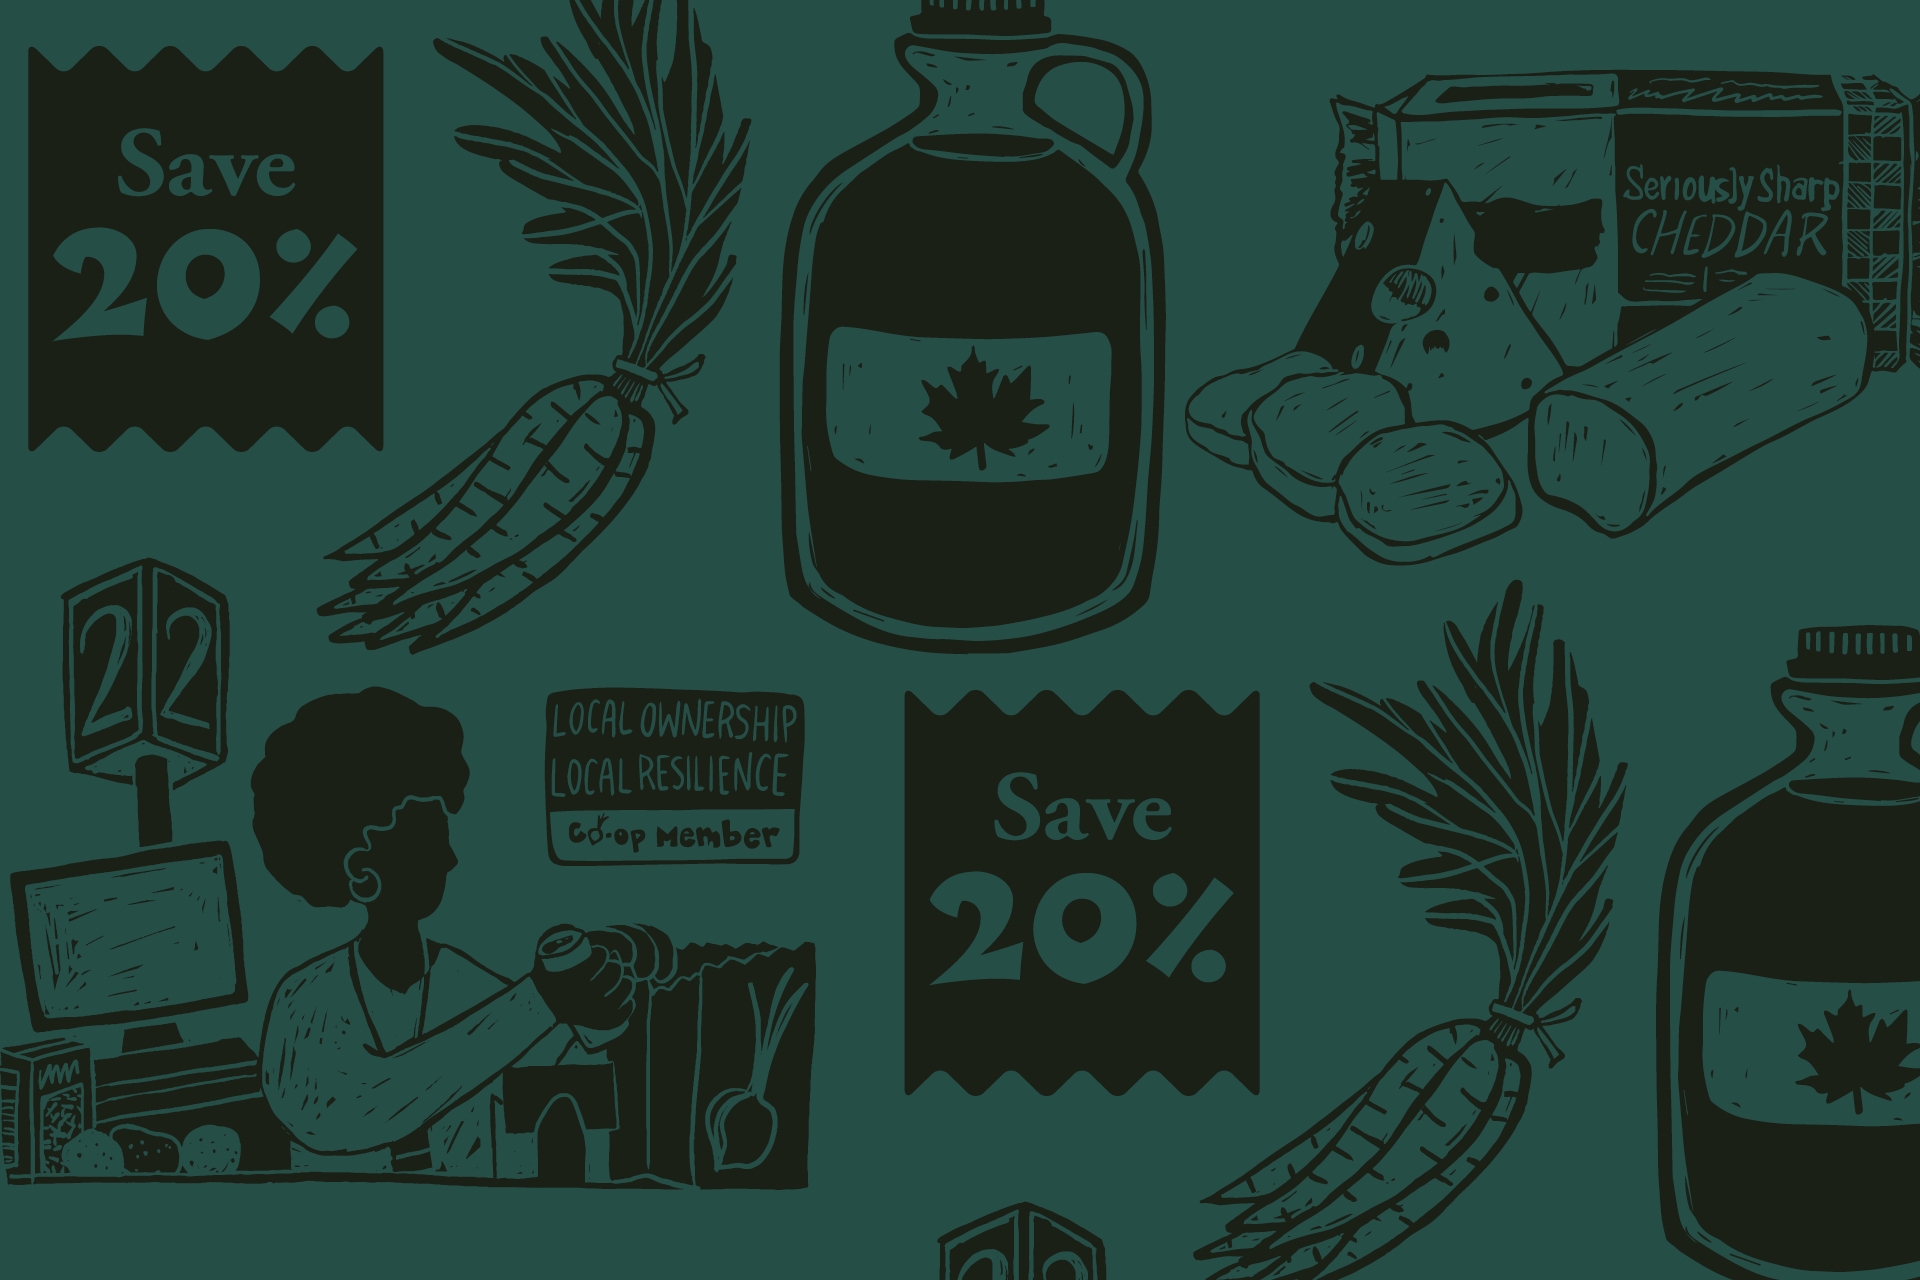 A dark teal field with dark green illustrations depicting grocery and produce items, including maple syrup, carrots and cheese.